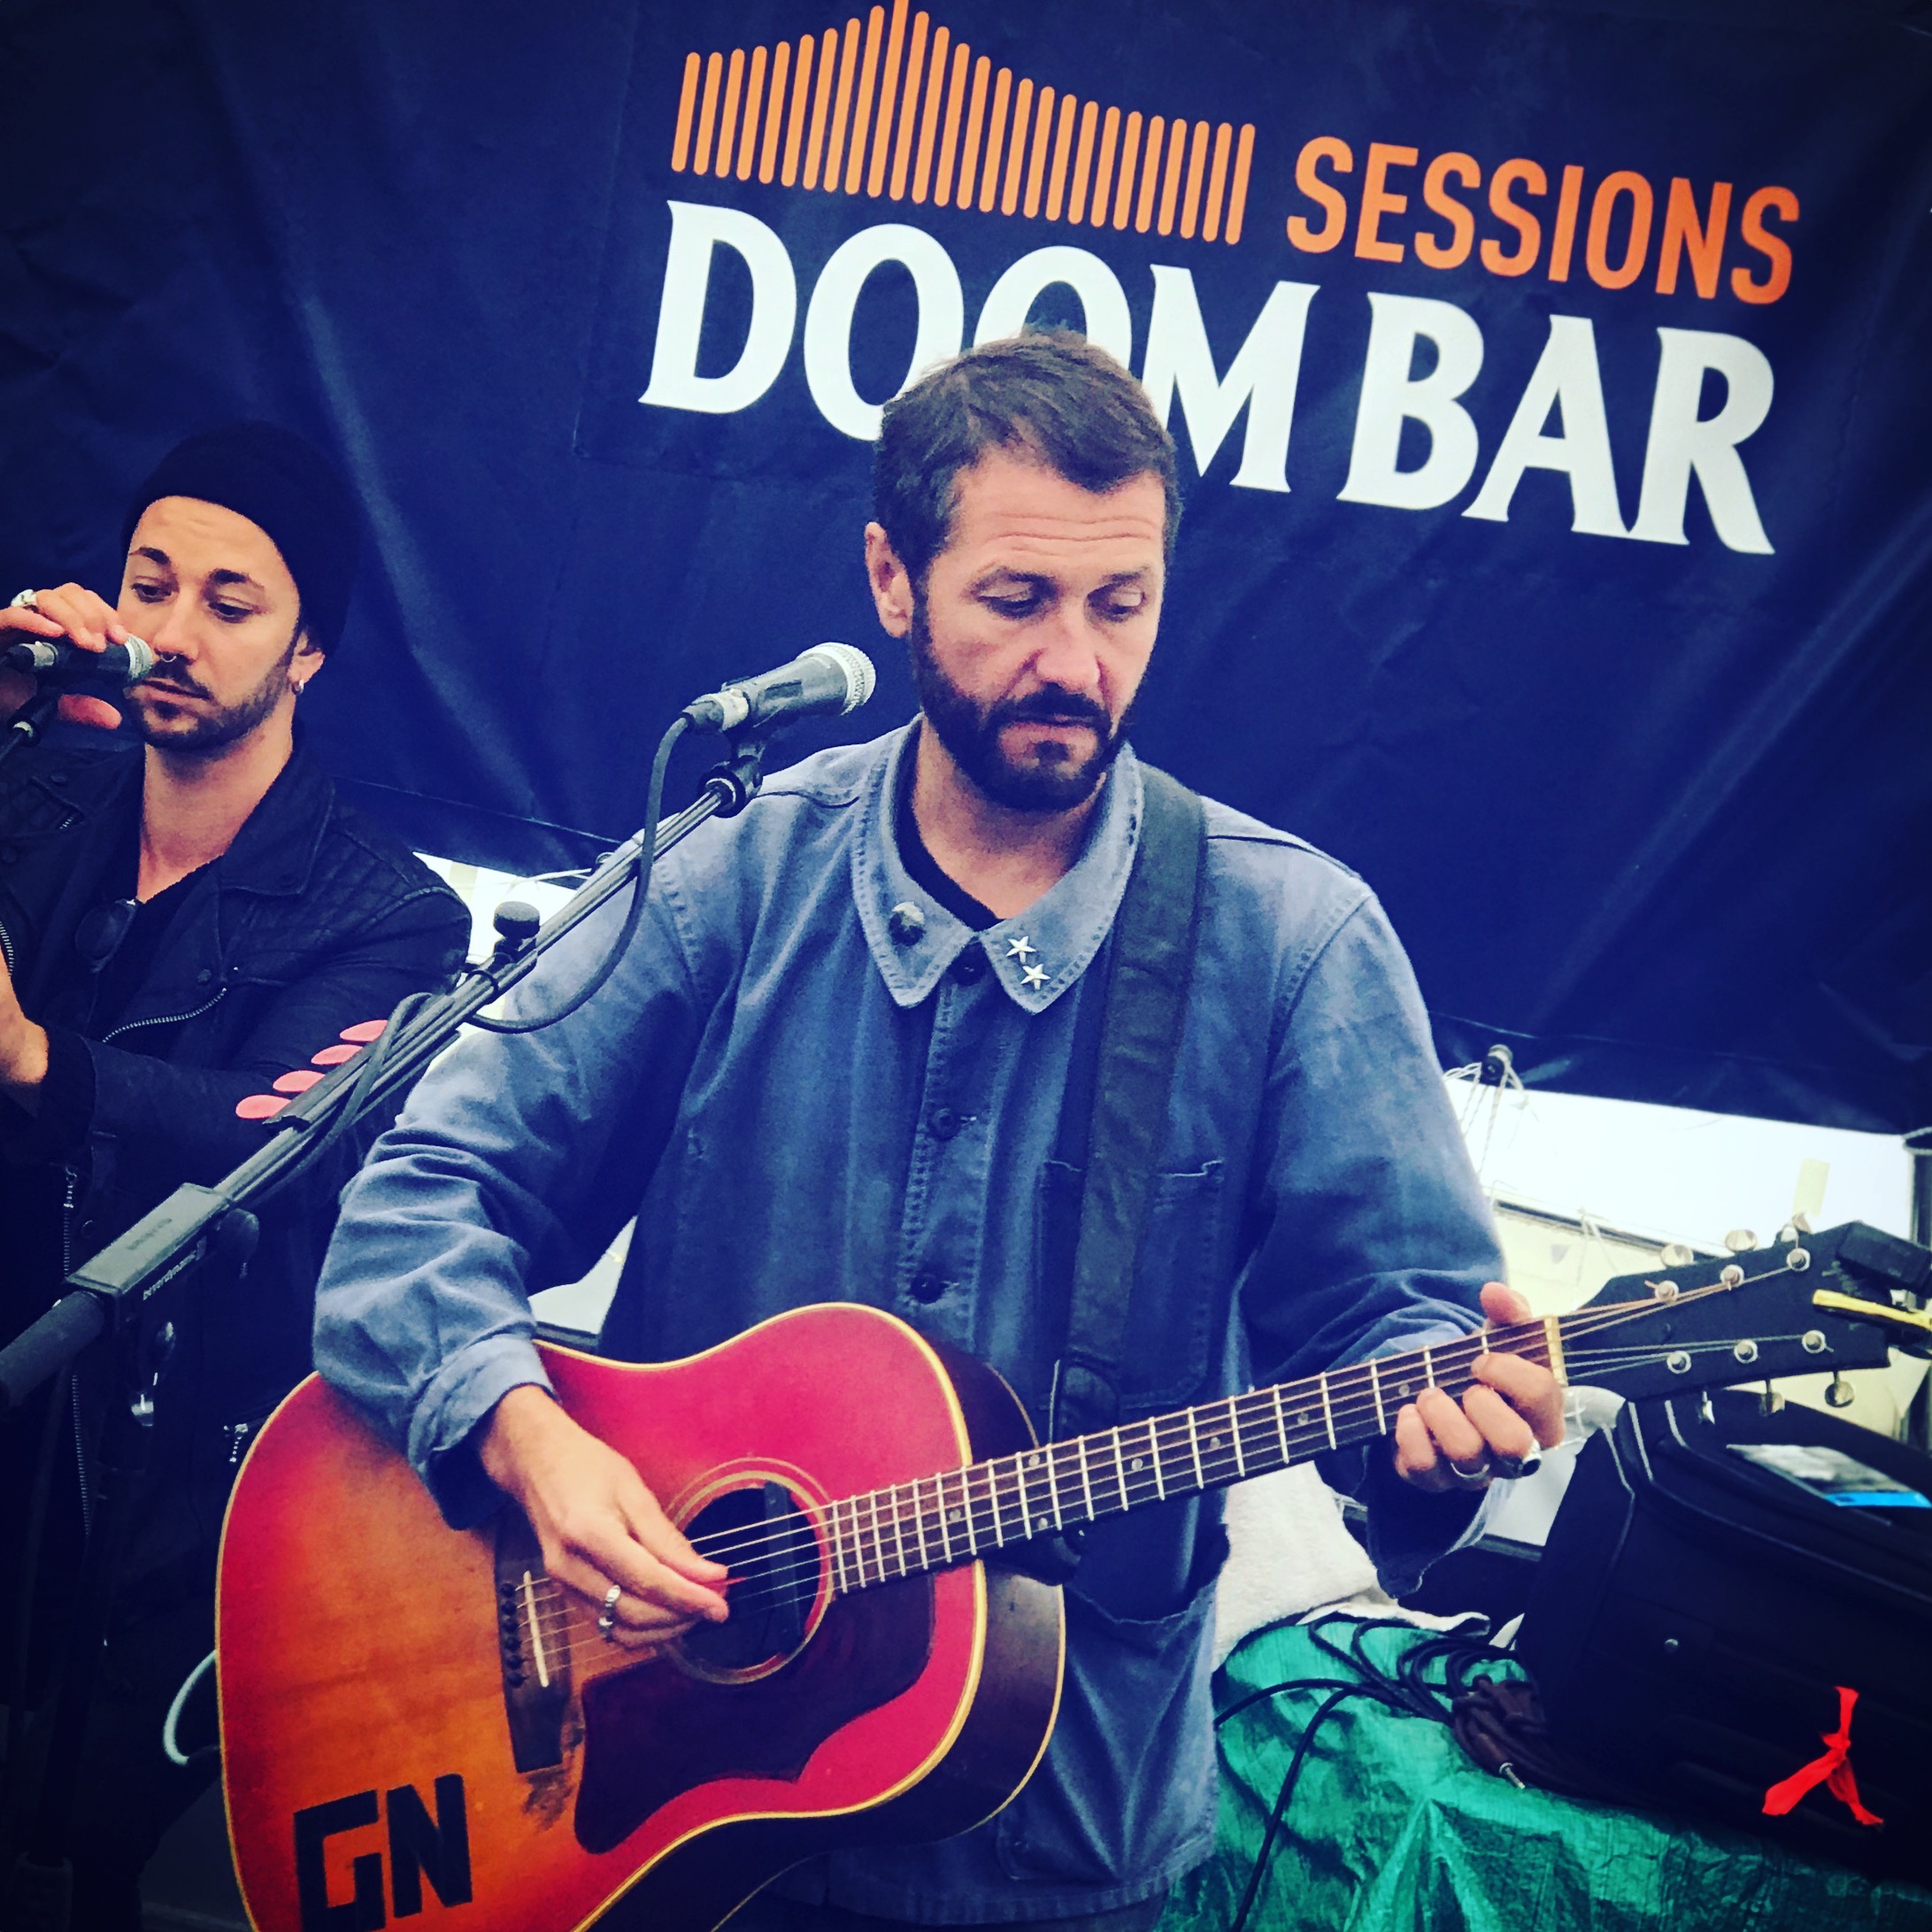 DoomBar Sessions live onboard!